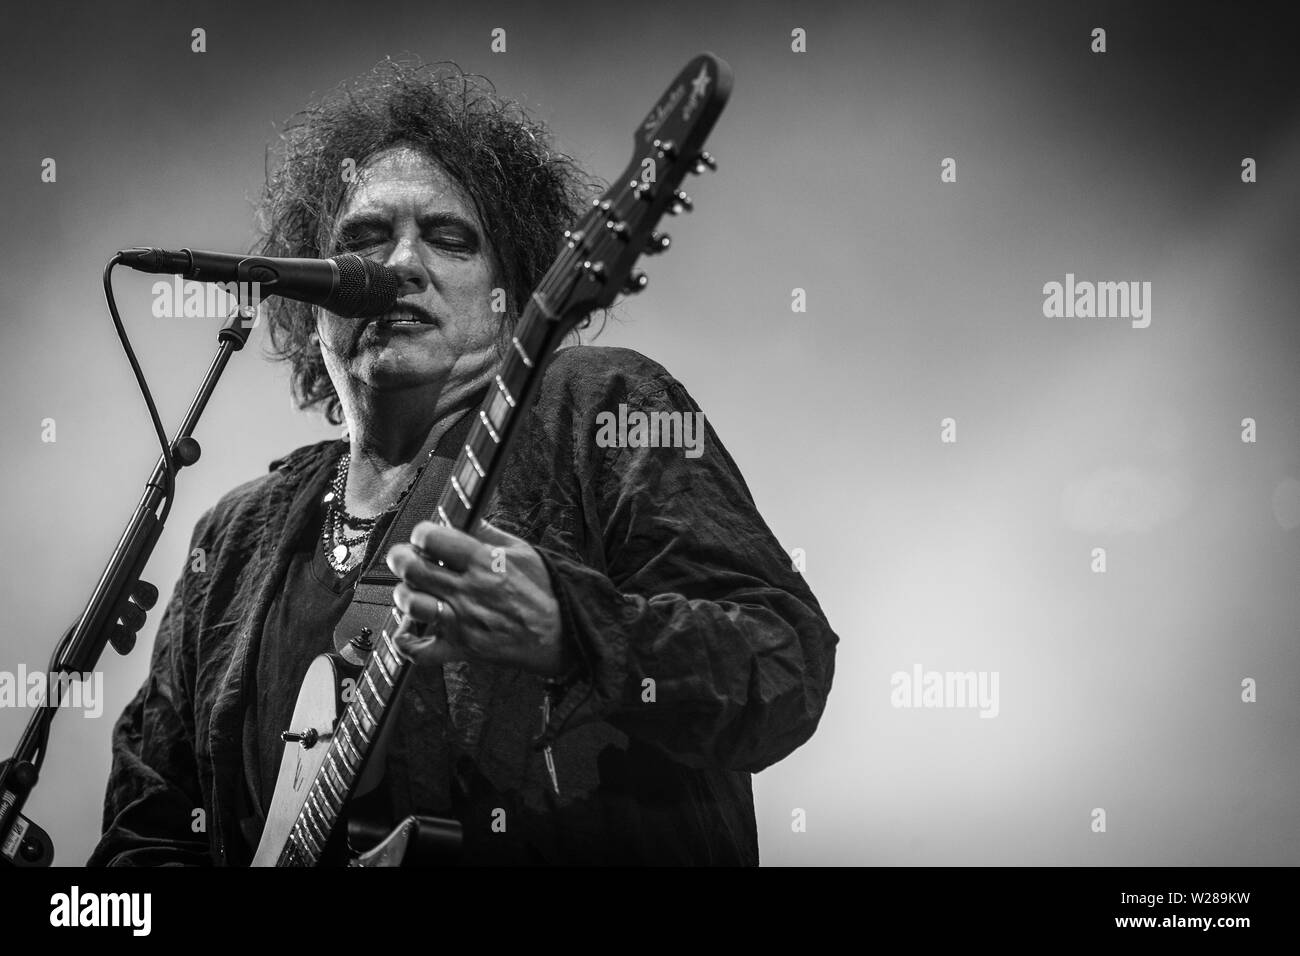 Roskilde, Denmark. 06th July, 2019. Roskilde, Denmark. July 06th, 2019. The English rock band The Cure performs a live concert during the Danish music festival Roskilde Festival 2019. Here singer, songwriter and musician Robert Smith is seen live on stage. (Photo Credit: Gonzales Photo/Alamy Live News Stock Photo